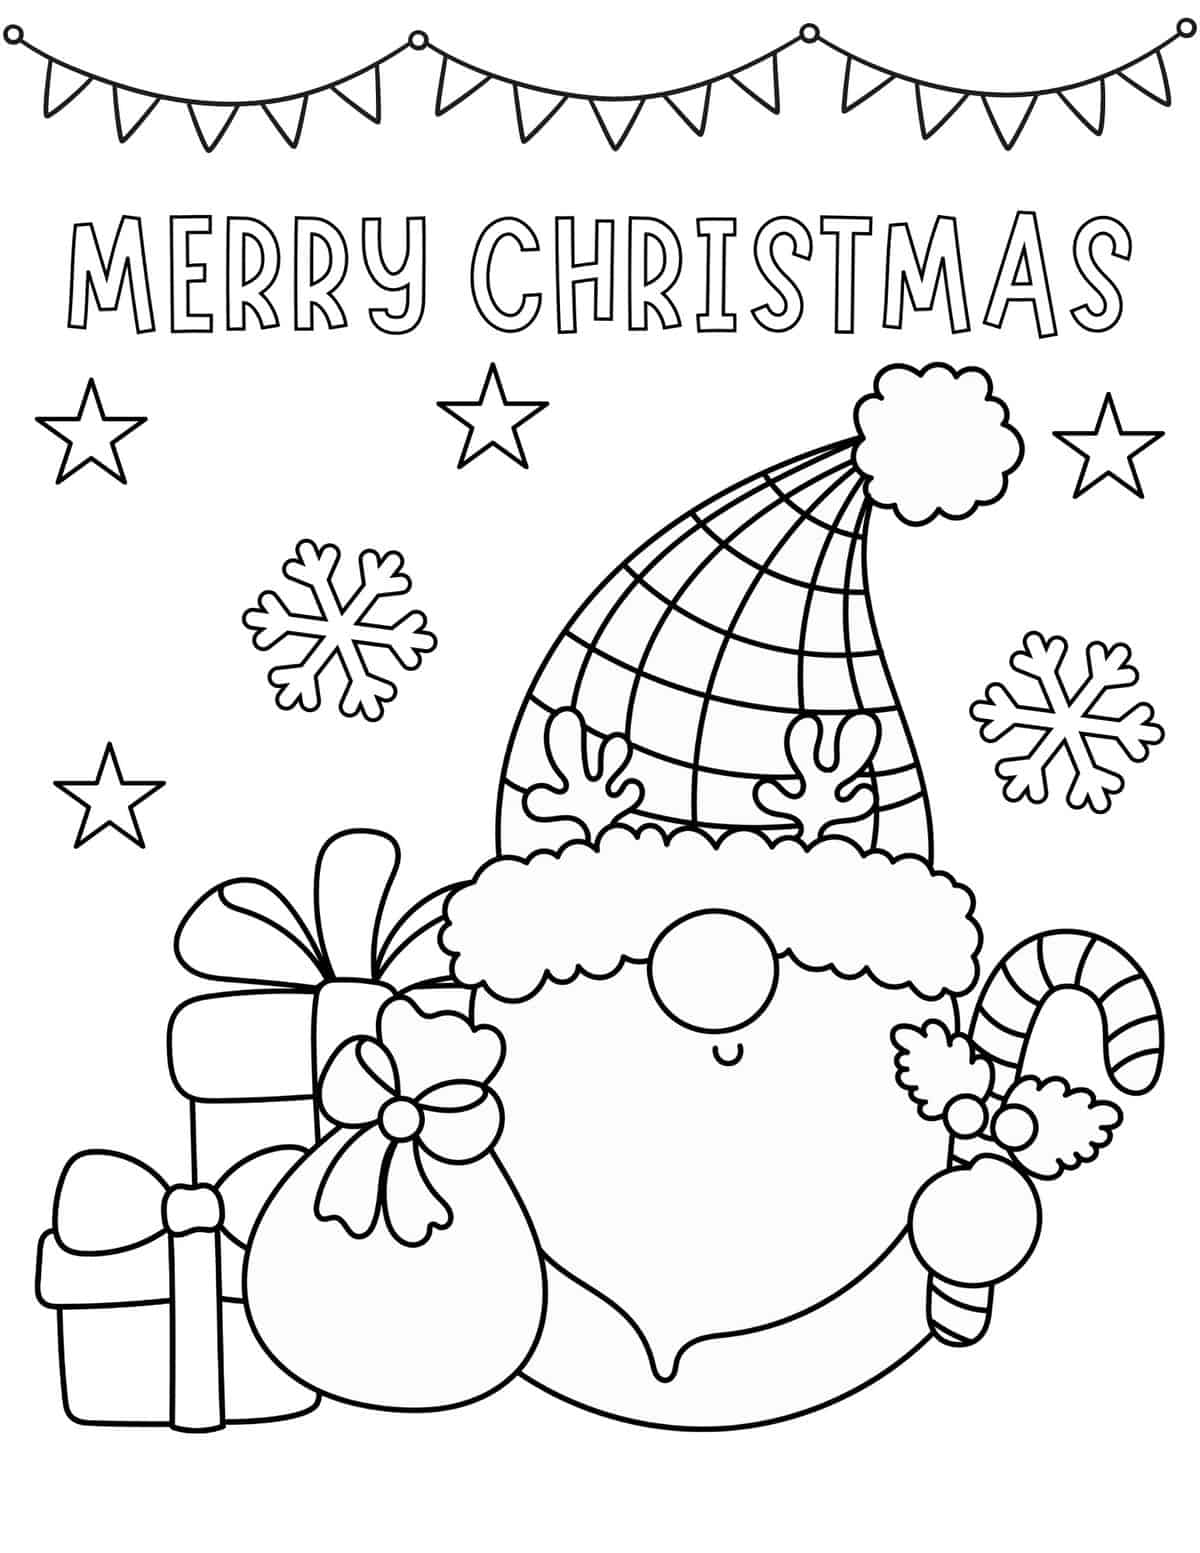 Christmas Coloring Pages: 10 Cute, Free Printable Downloads - Cute Coloring  Pages For Kids